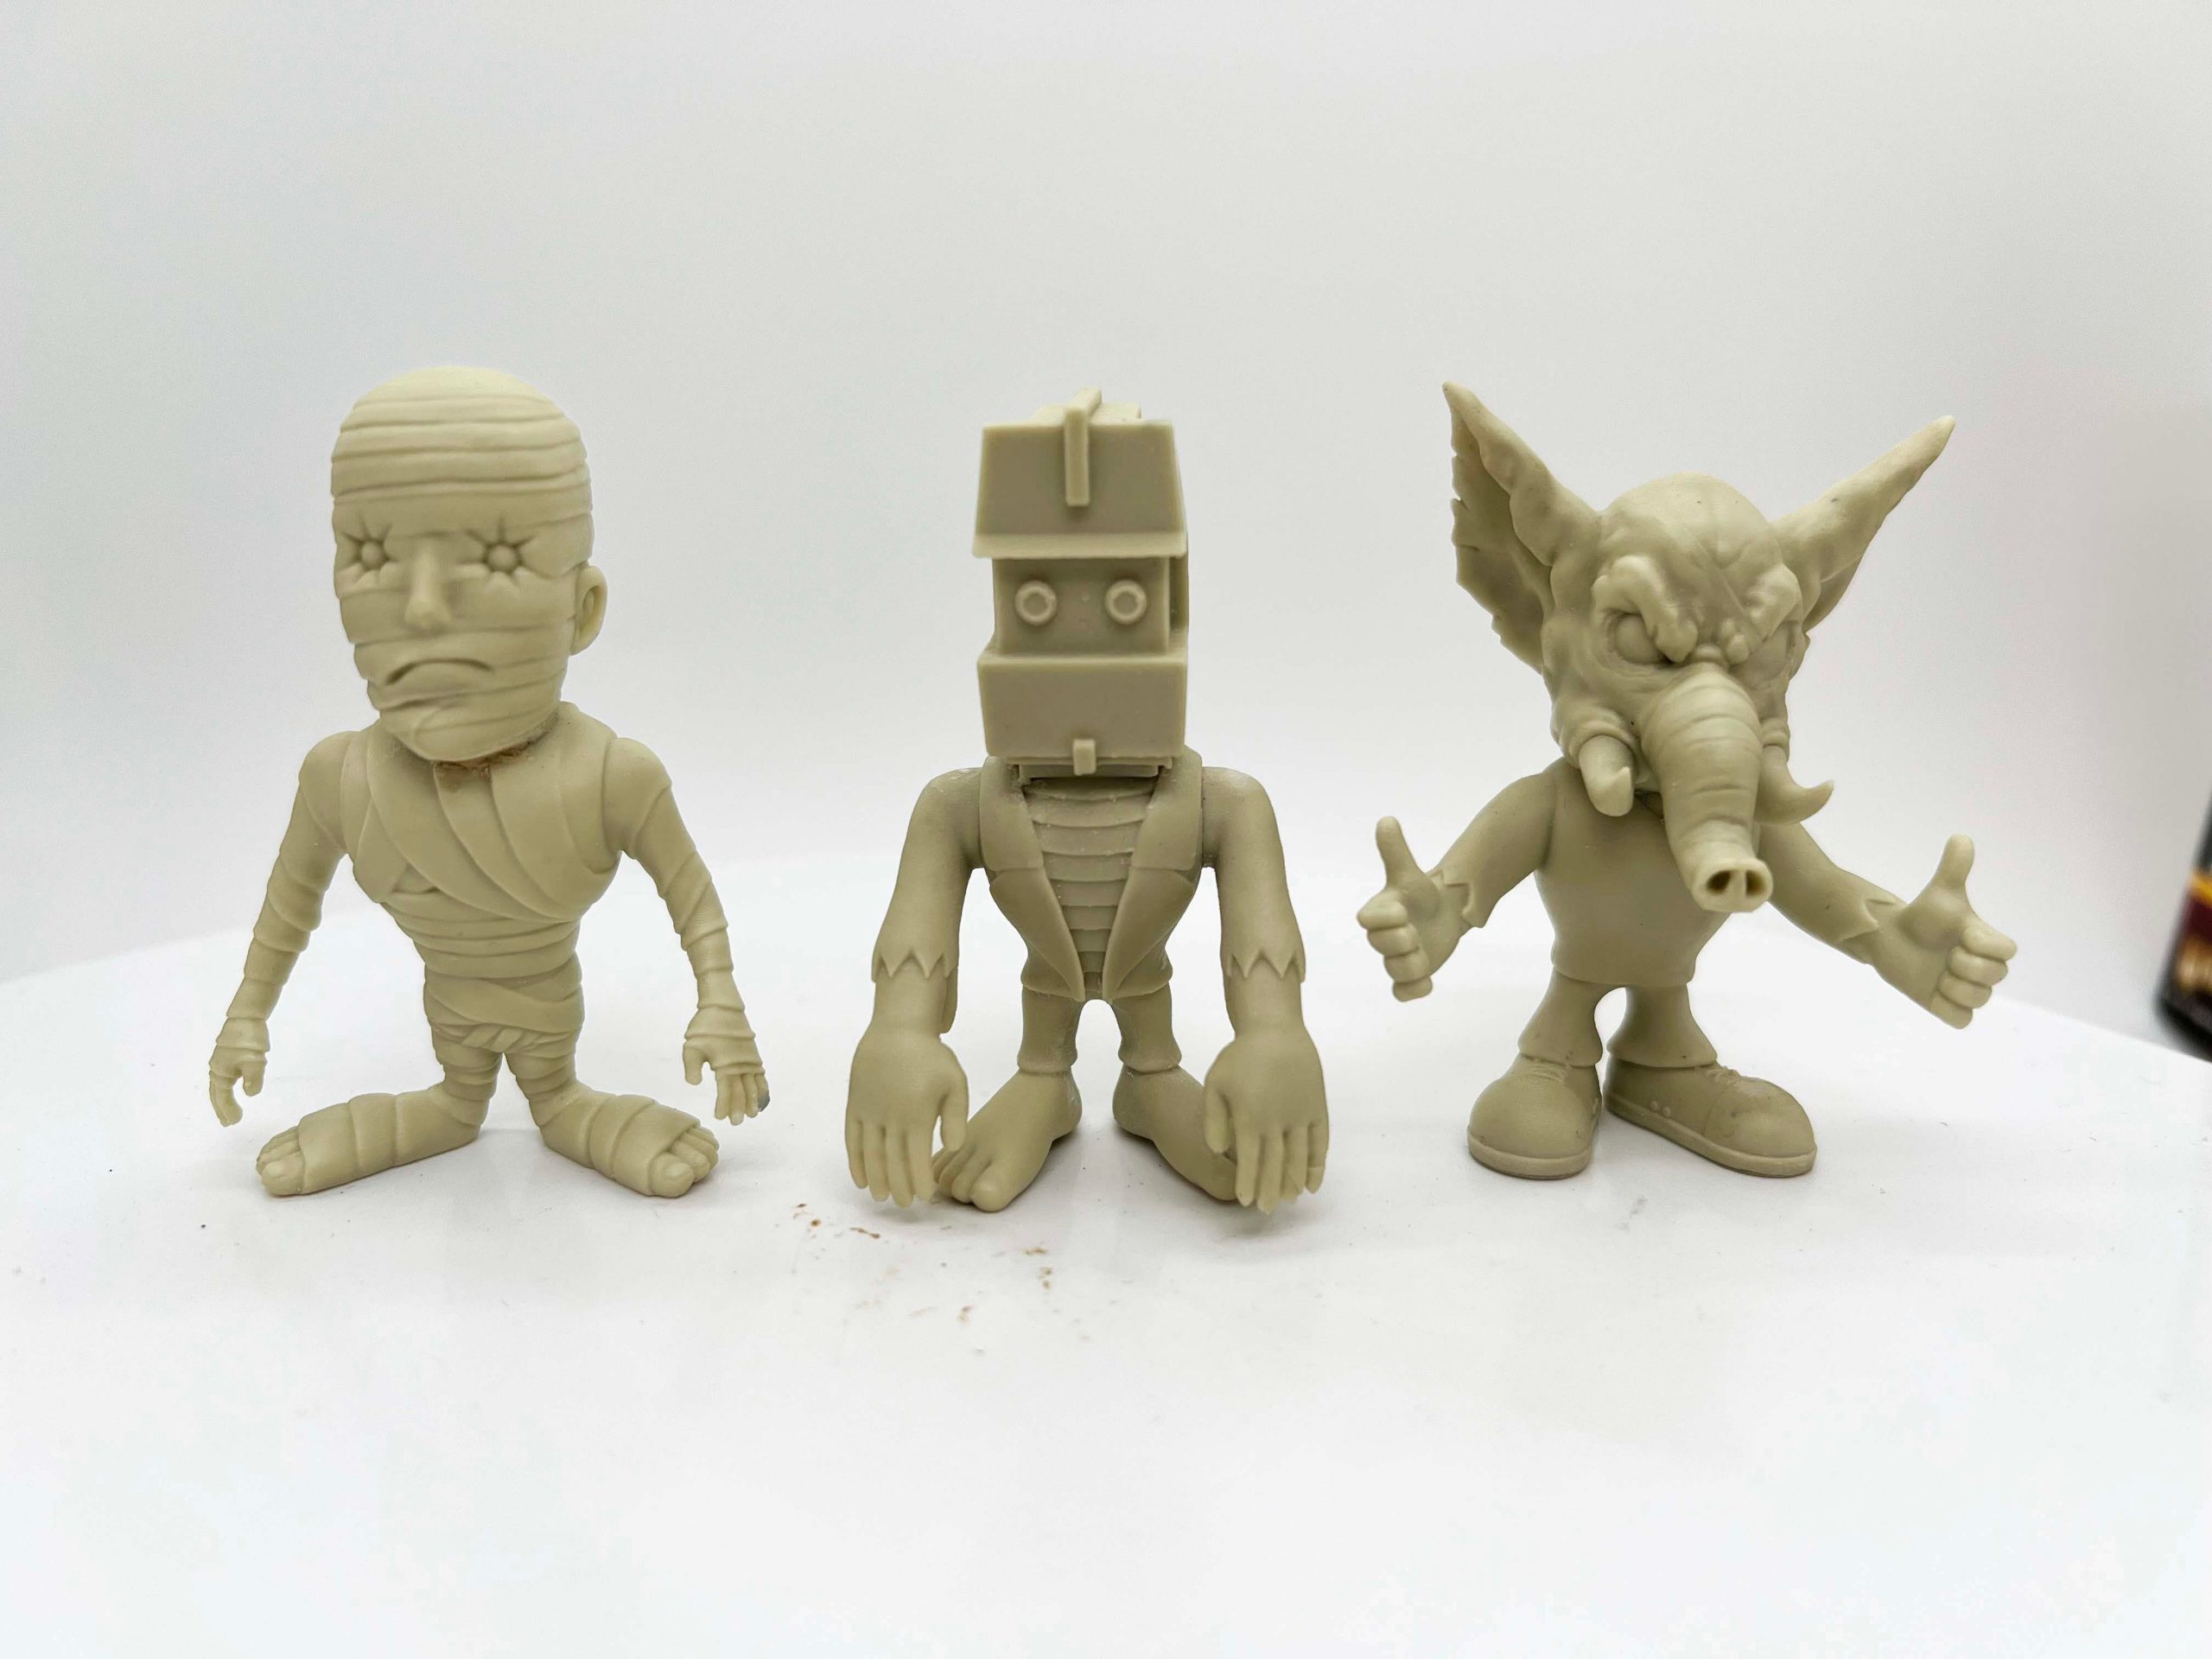 Additional images mixed in the White Elephant Toyz "Grave Yard Geeks" figures.